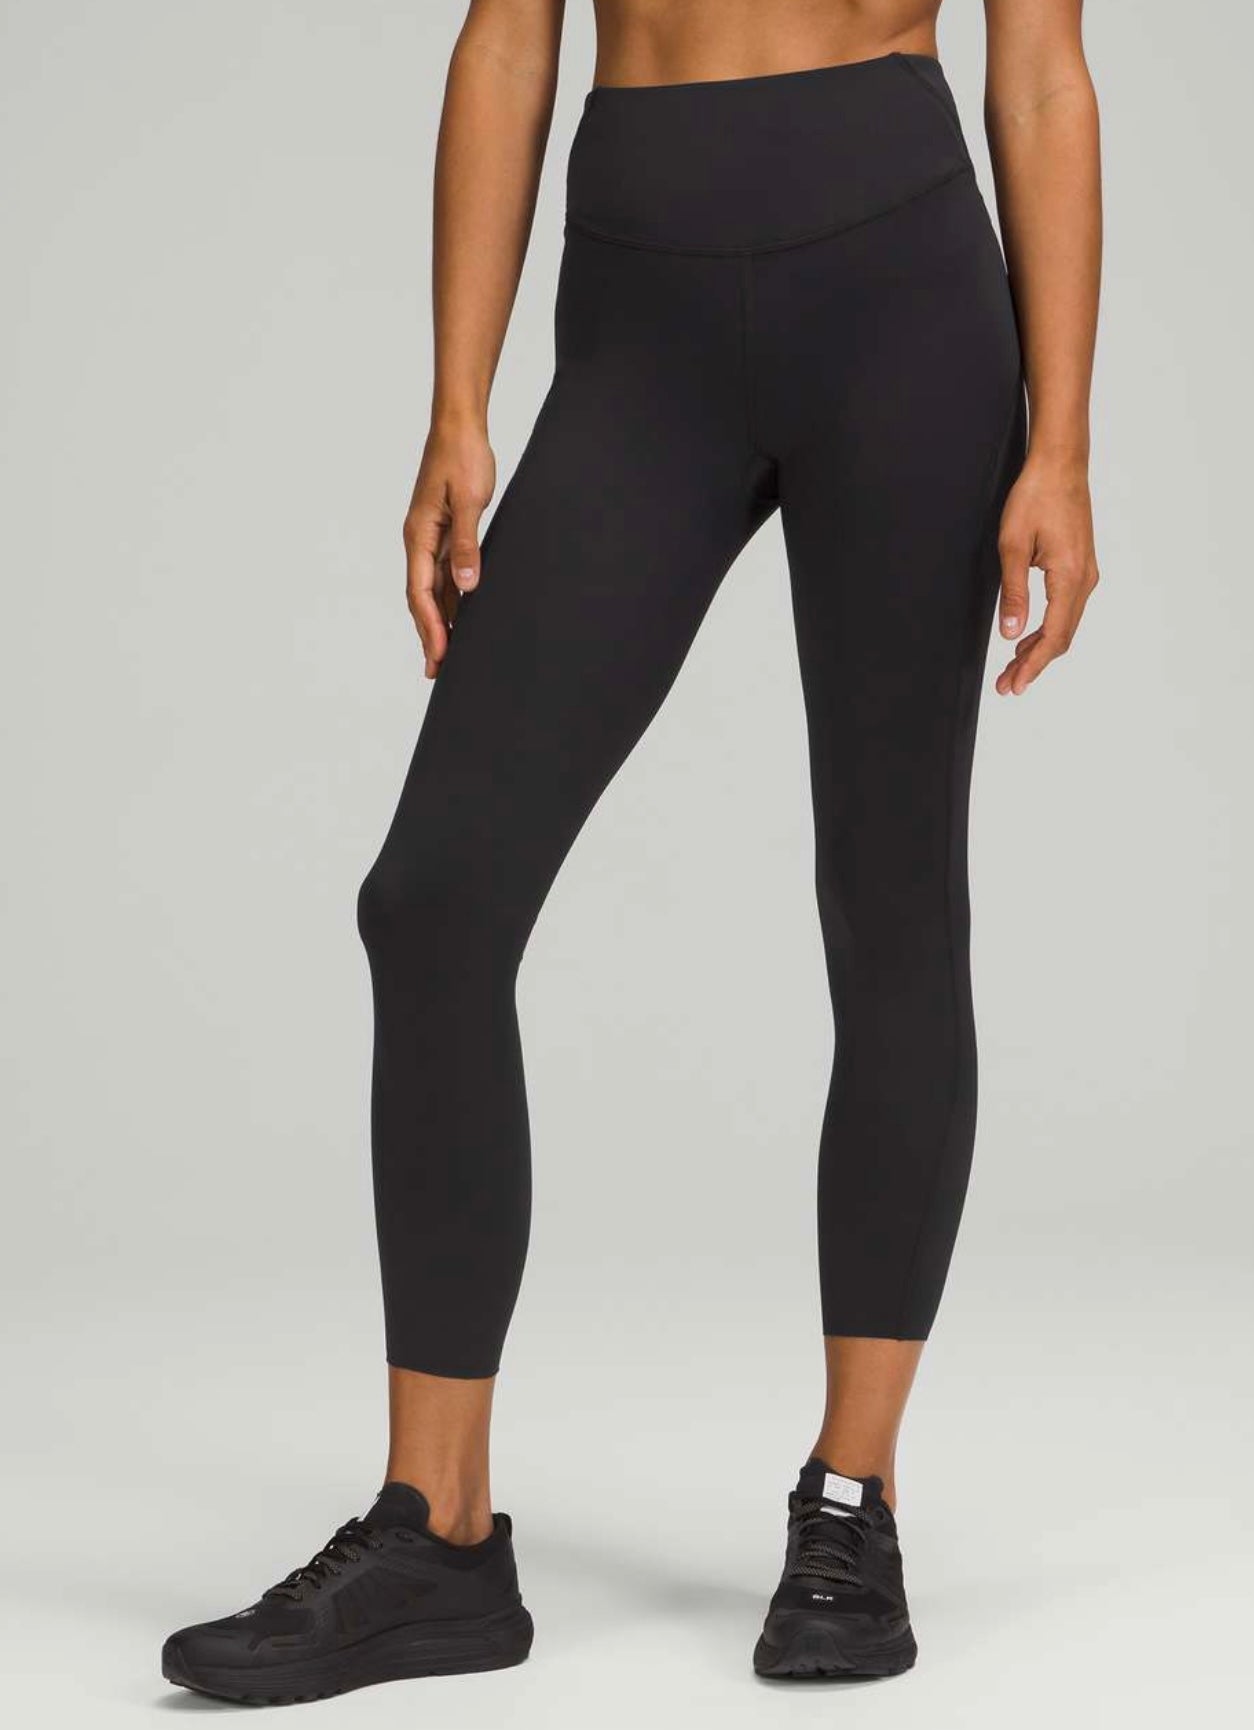 Lululemon Base Pace Tights Review